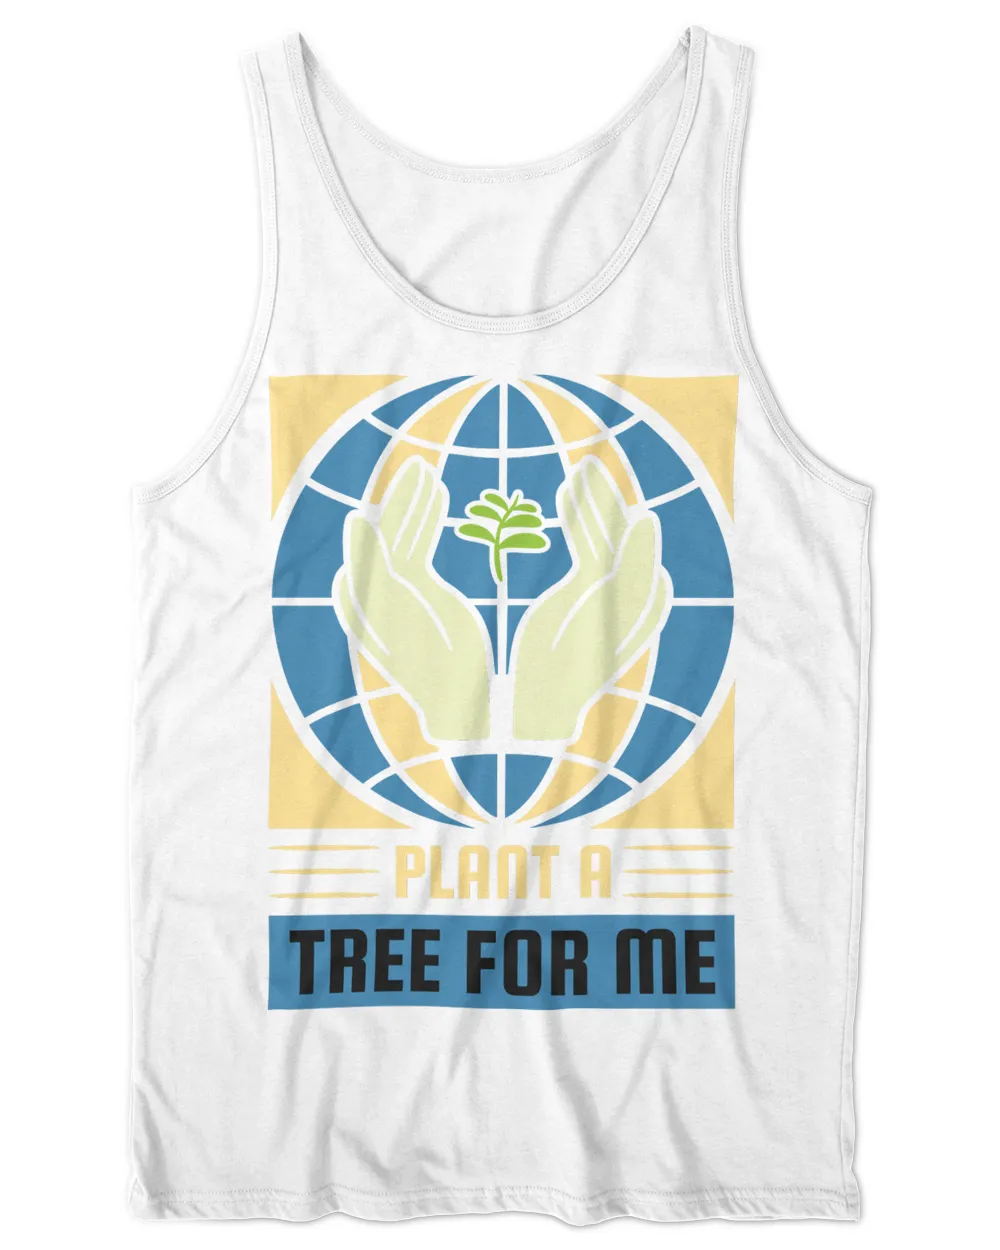 Plant a Tree For Me (Earth Day Slogan T-Shirt)